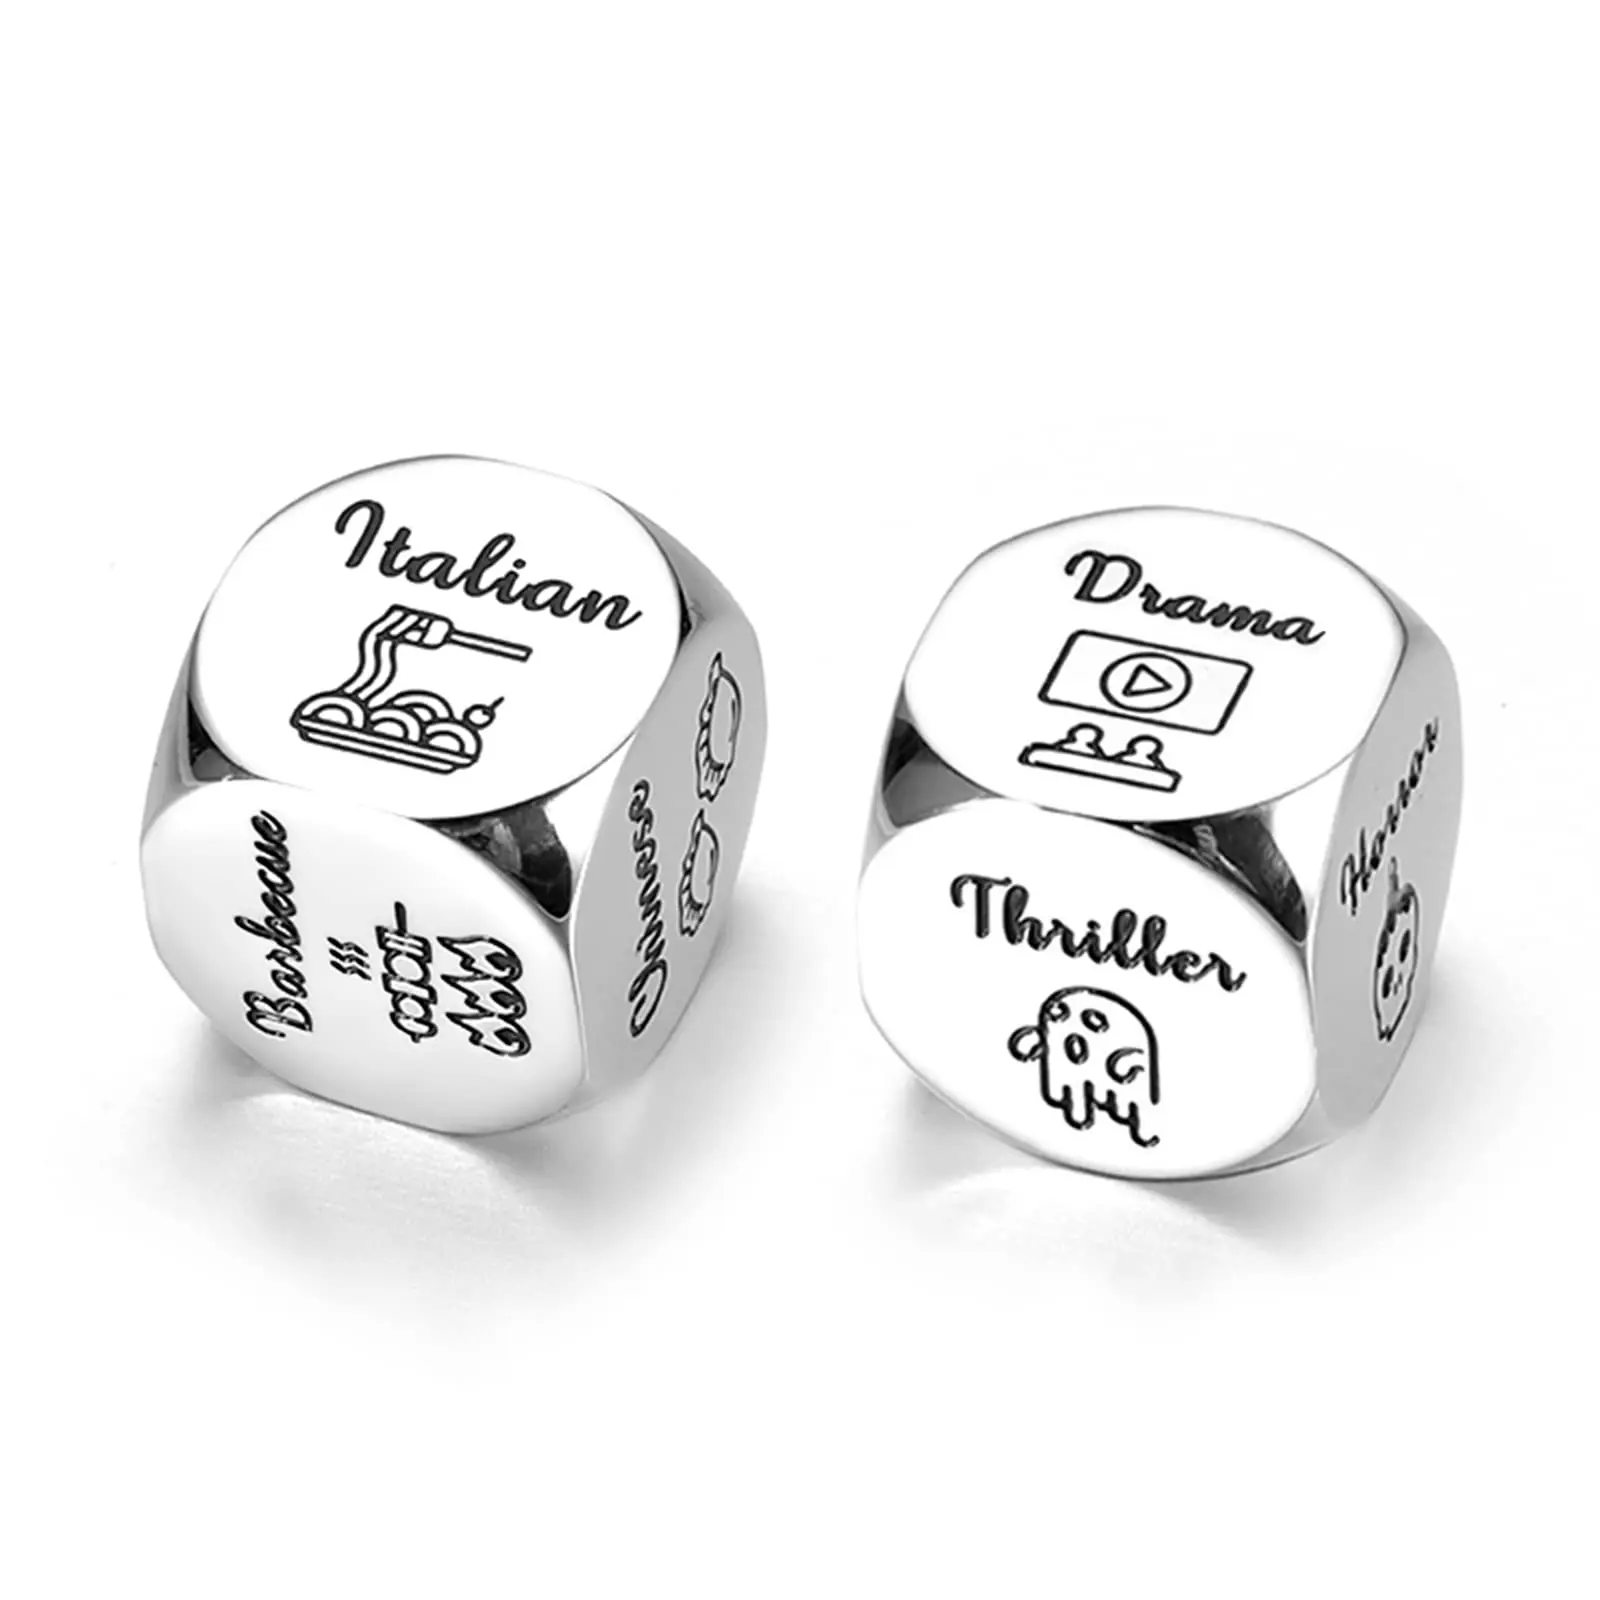 

Food Movie TV Decision Dice Couple Date Night Ideas Funny Gift for Lover Boyfriend Hubby Wife Birthday Wedding Anniversary Gifts